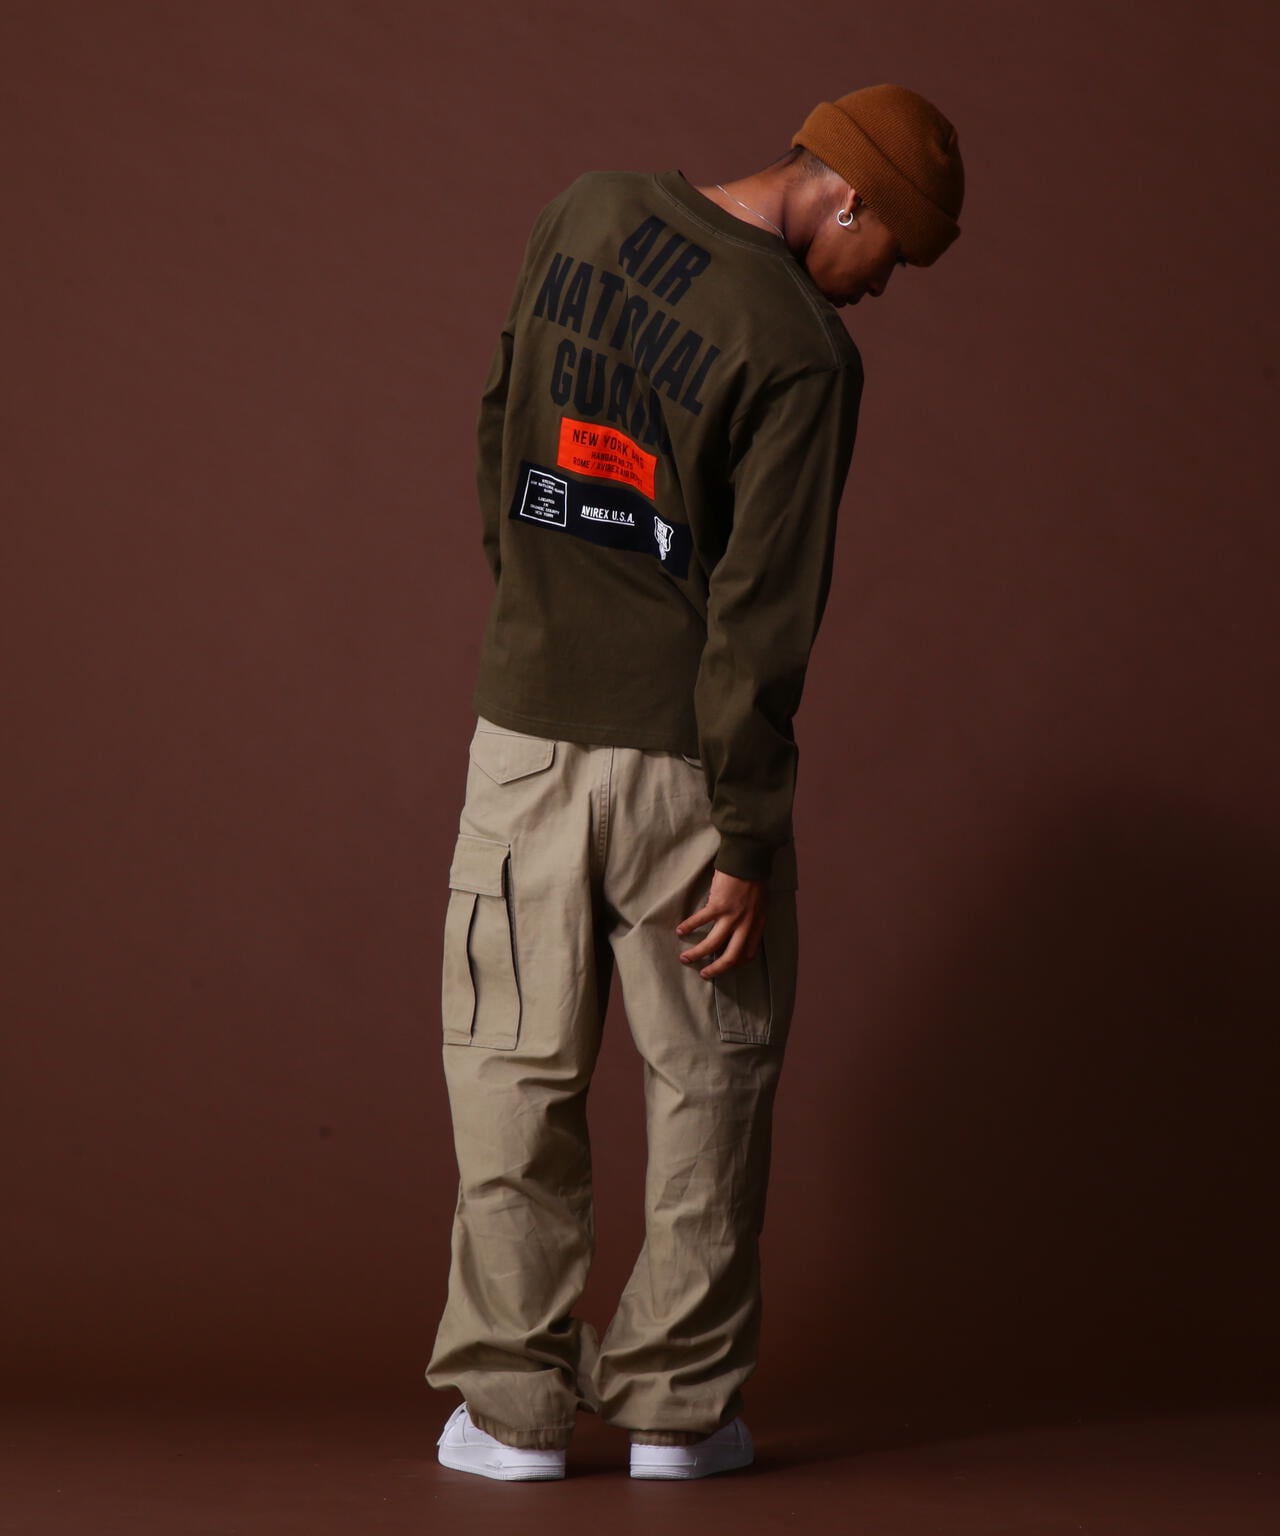 《COLLECTION》AIR NATIONAL GUARD PATCH & PRINT L